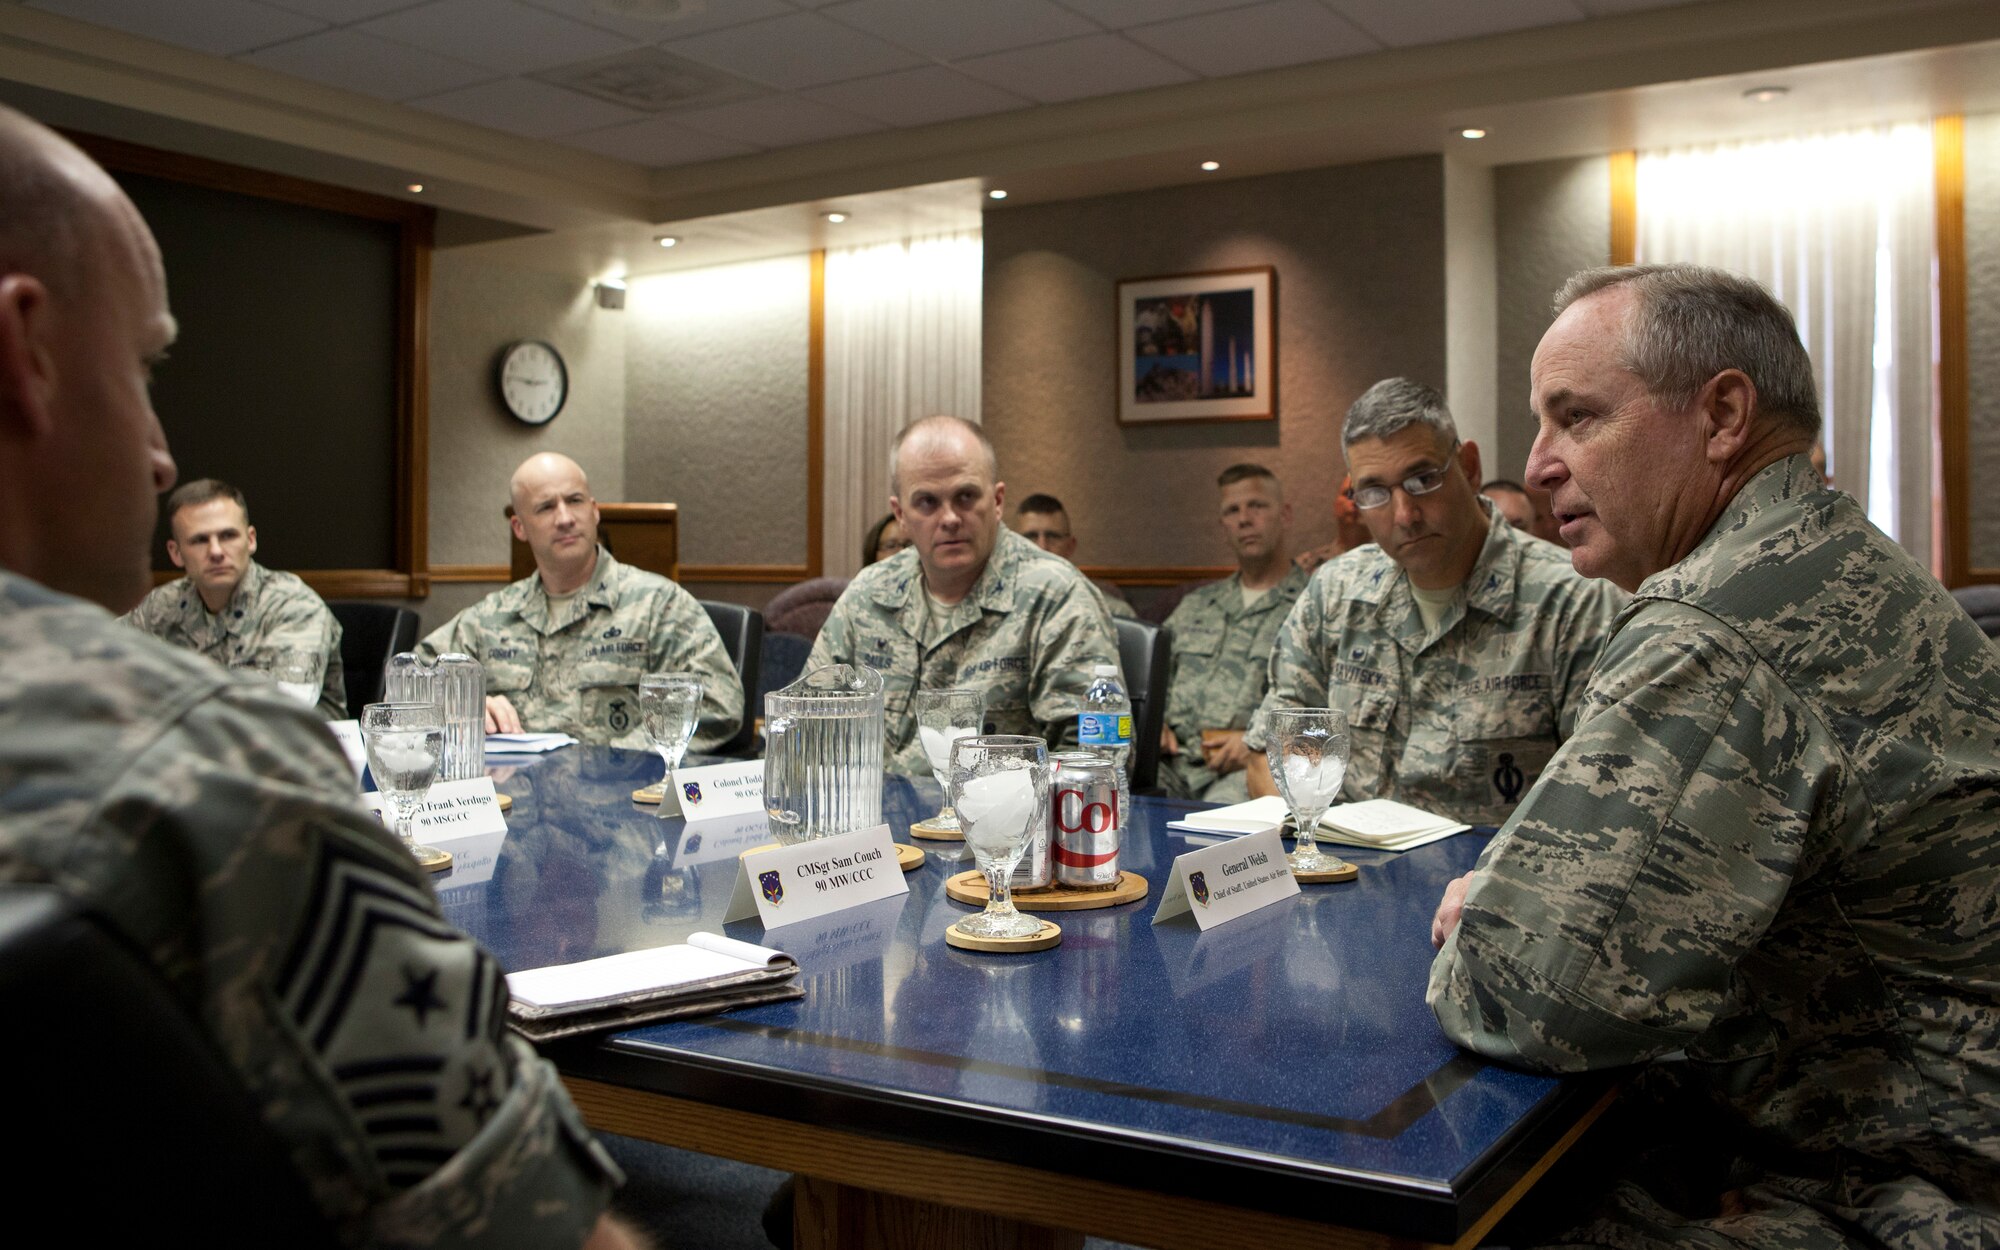 Air Force Chief of Staff Gen. Mark A. Welsh III meets with 90th Missile Wing leadership in a roundtable discussion on F.E. Warren Air Force Base, Wyo., Aug. 3, 2015. Welsh visited Warren to meet with leadership and reinforce nuclear mission responsibilities and expectations to ensure the rigorous standards of the nuclear enterprise are met. (U.S. Air Force photo by Lan Kim)